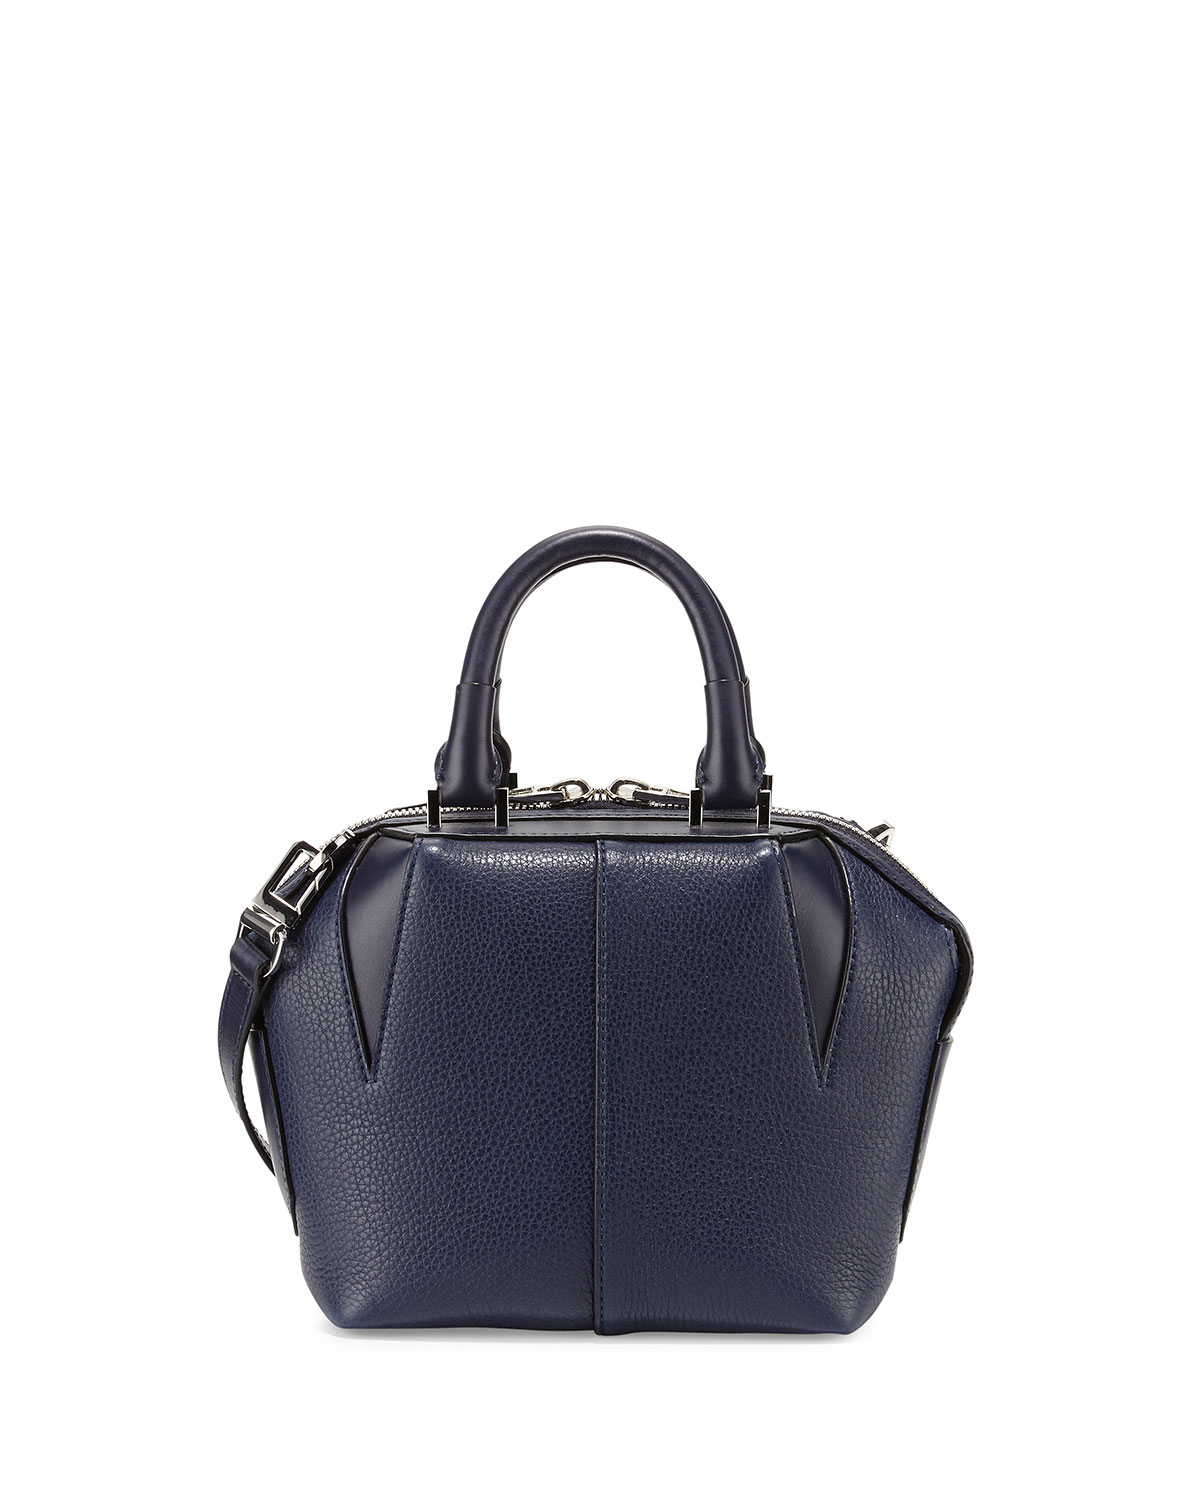 Alexander Wang Mini Emile Pebbled Leather Tote Bag in Blue (navy) | Lyst